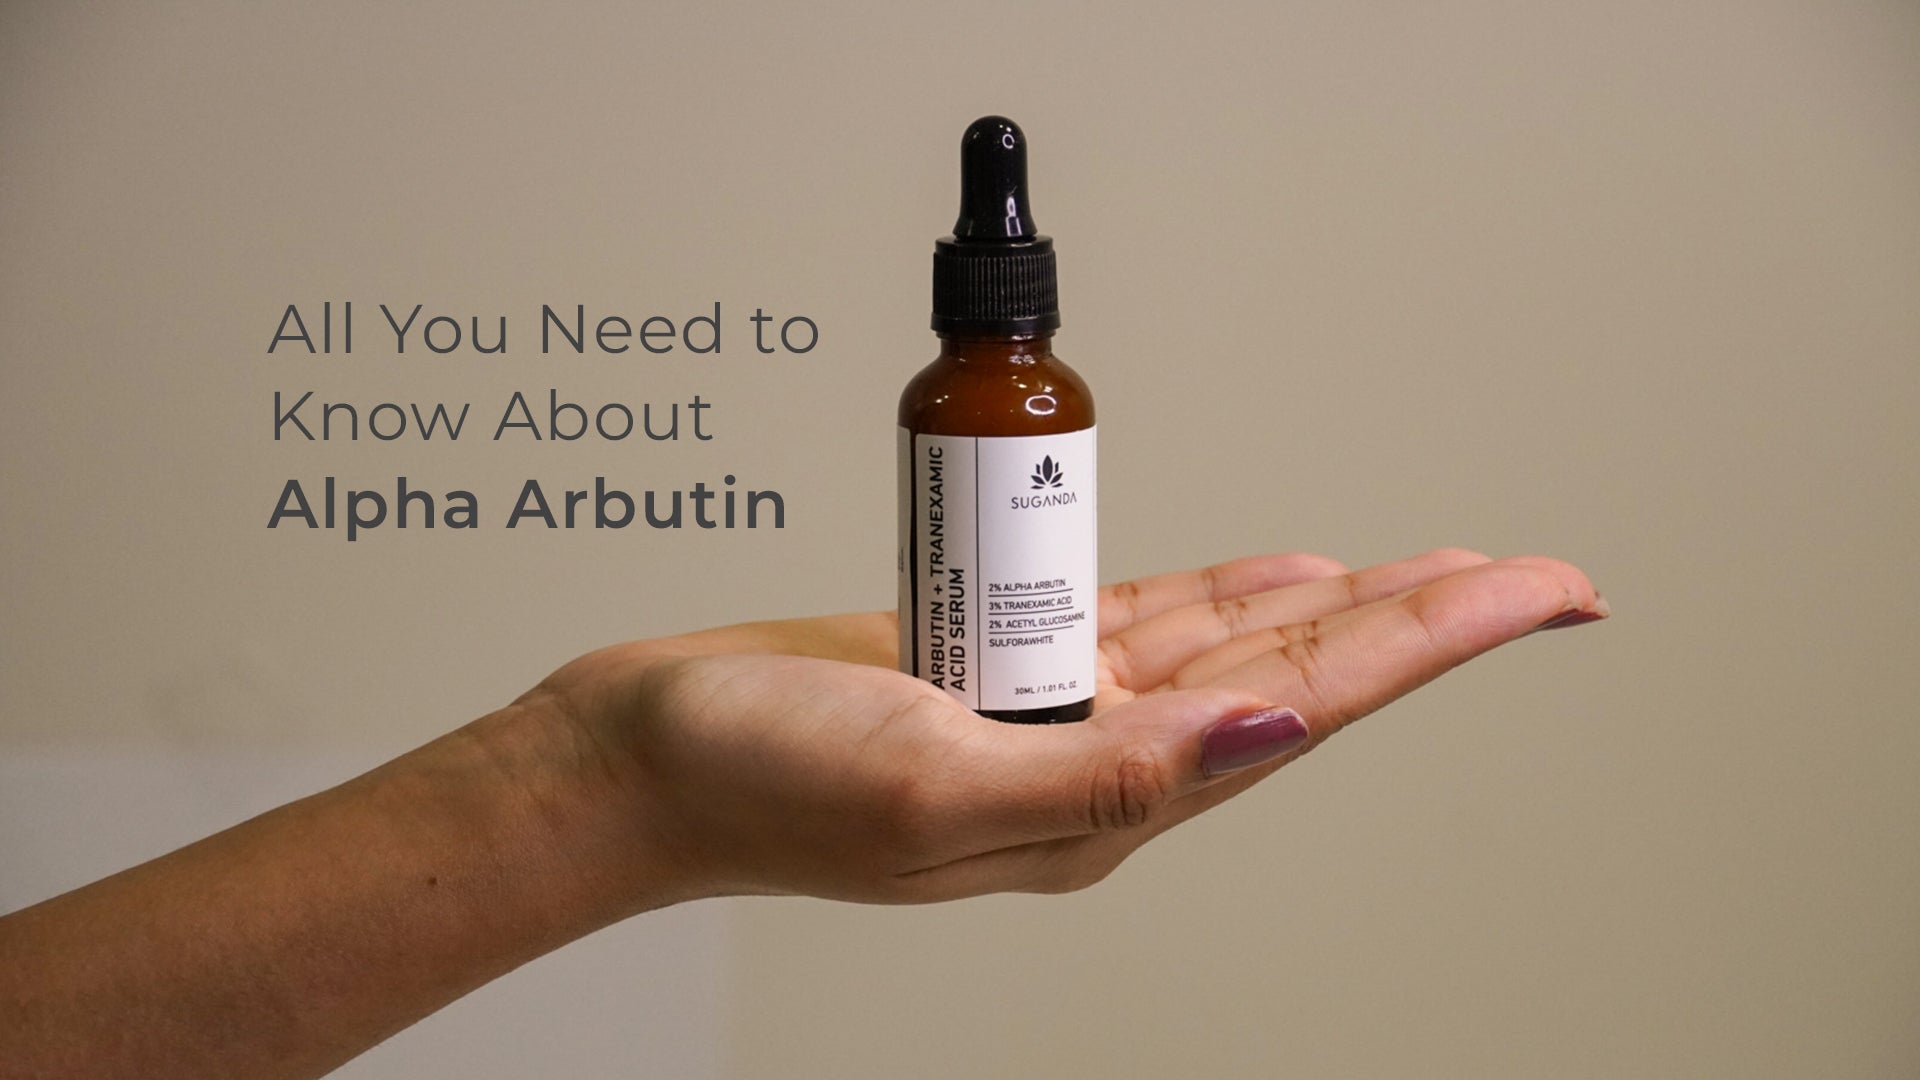 All You Need to Know About Alpha Arbutin